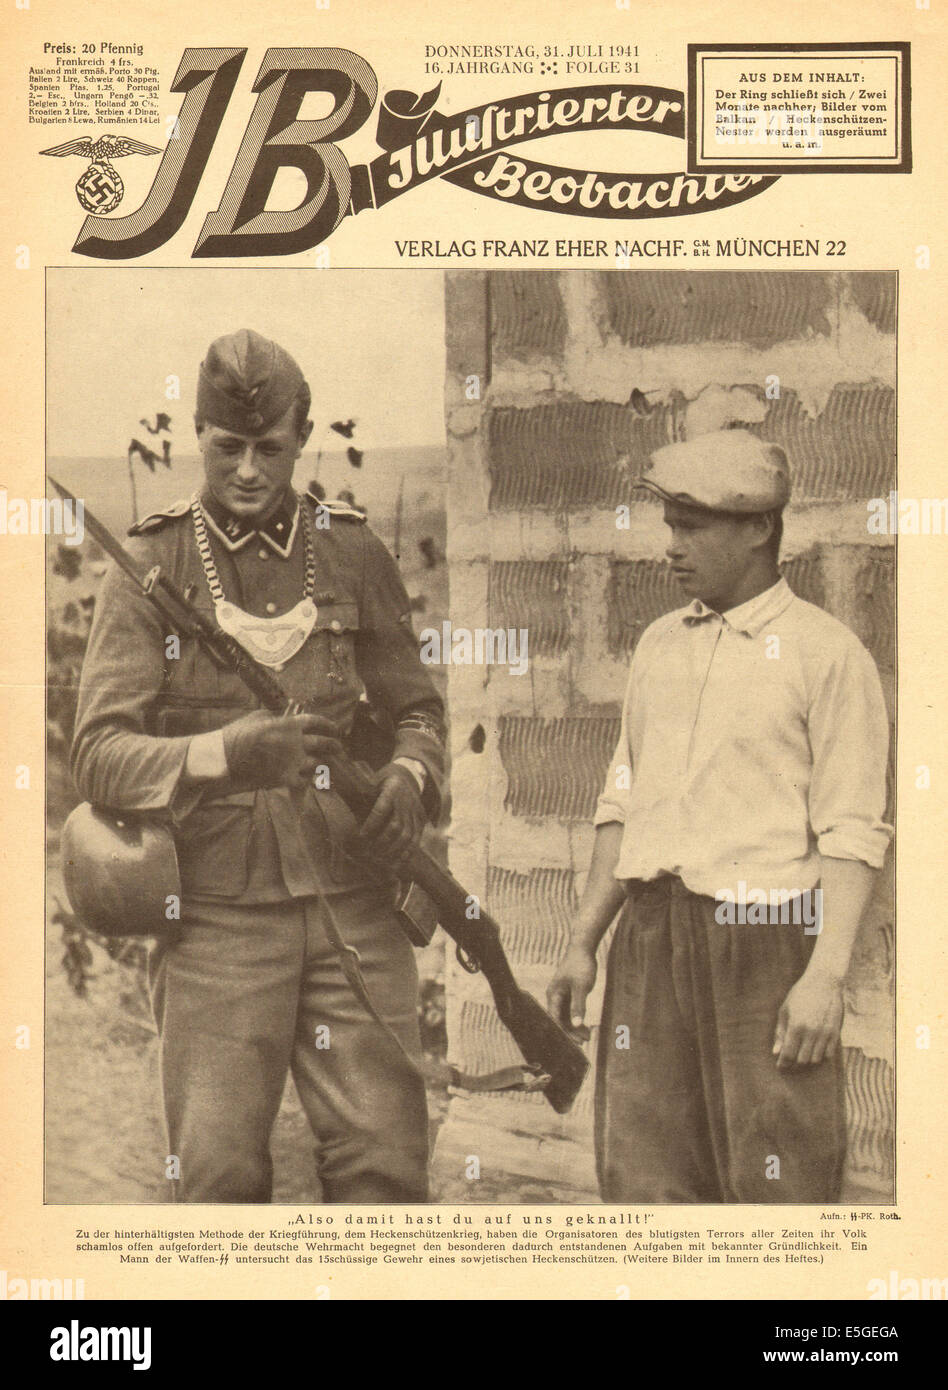 1941 Illustrierte Beobachter front page showing a Waffen SS soldier in Russia Stock Photo